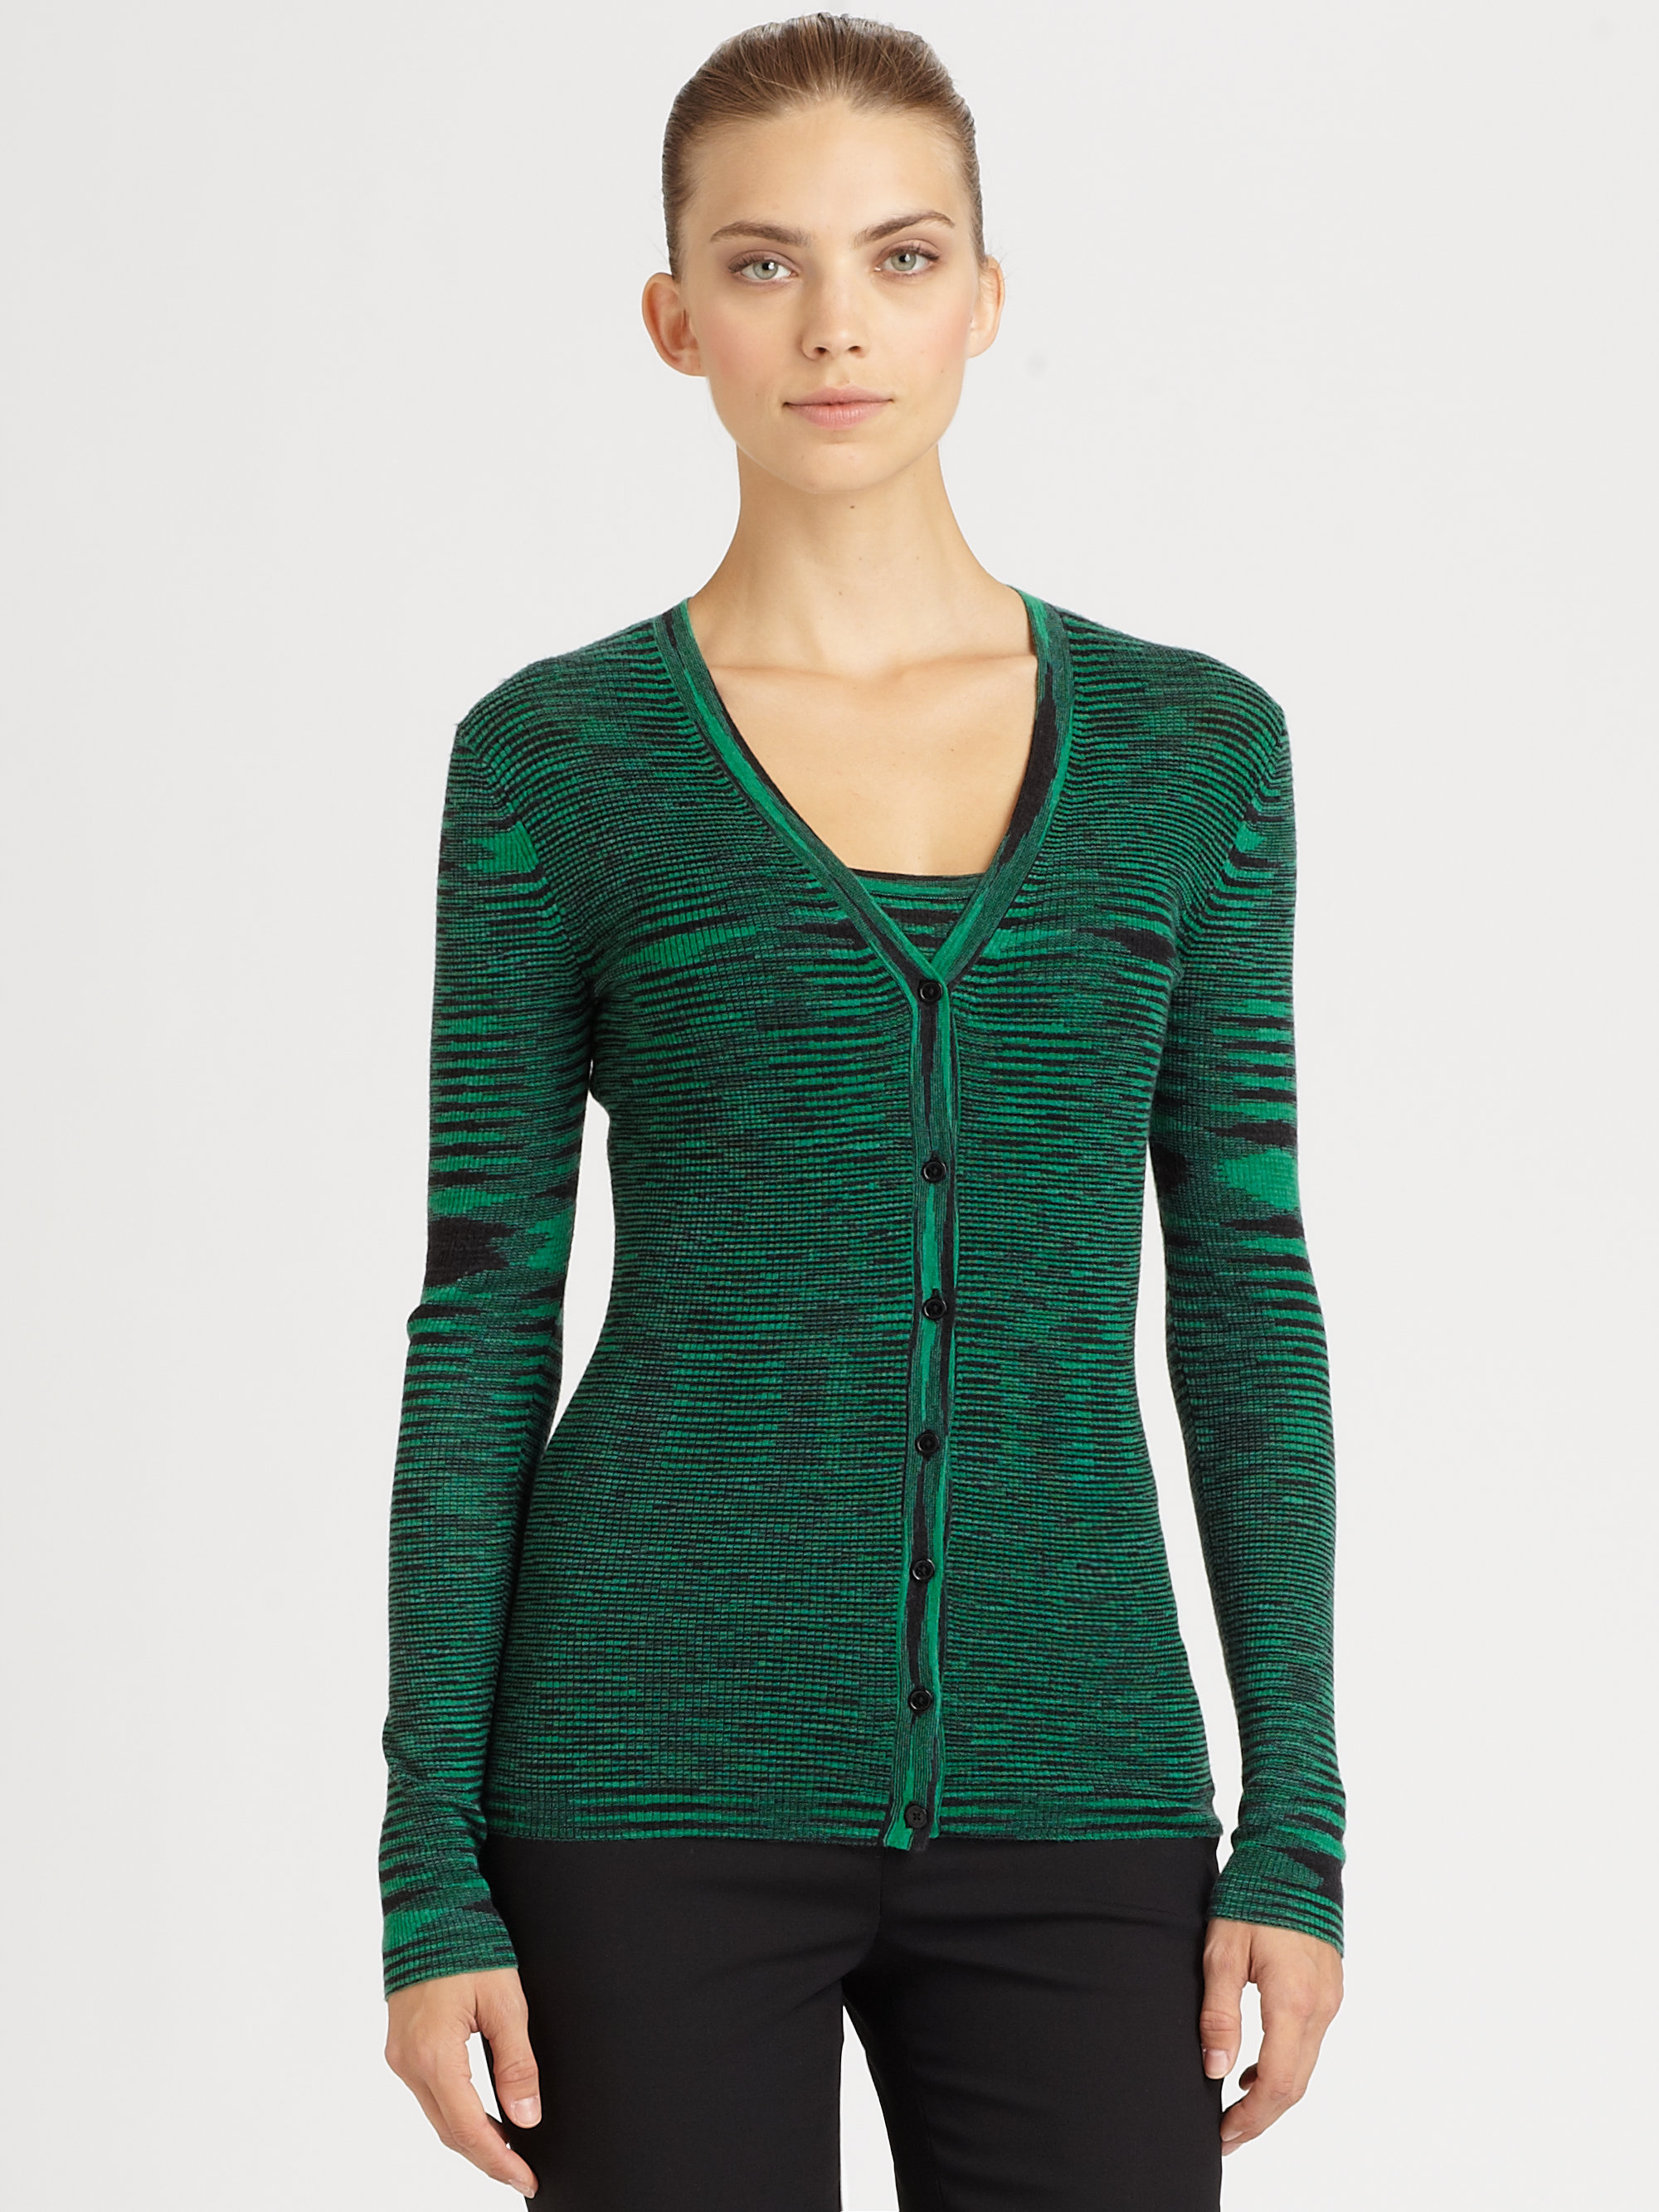 Michael Kors Spacedyed Cashmere Cardigan in Green (emerald multi) | Lyst